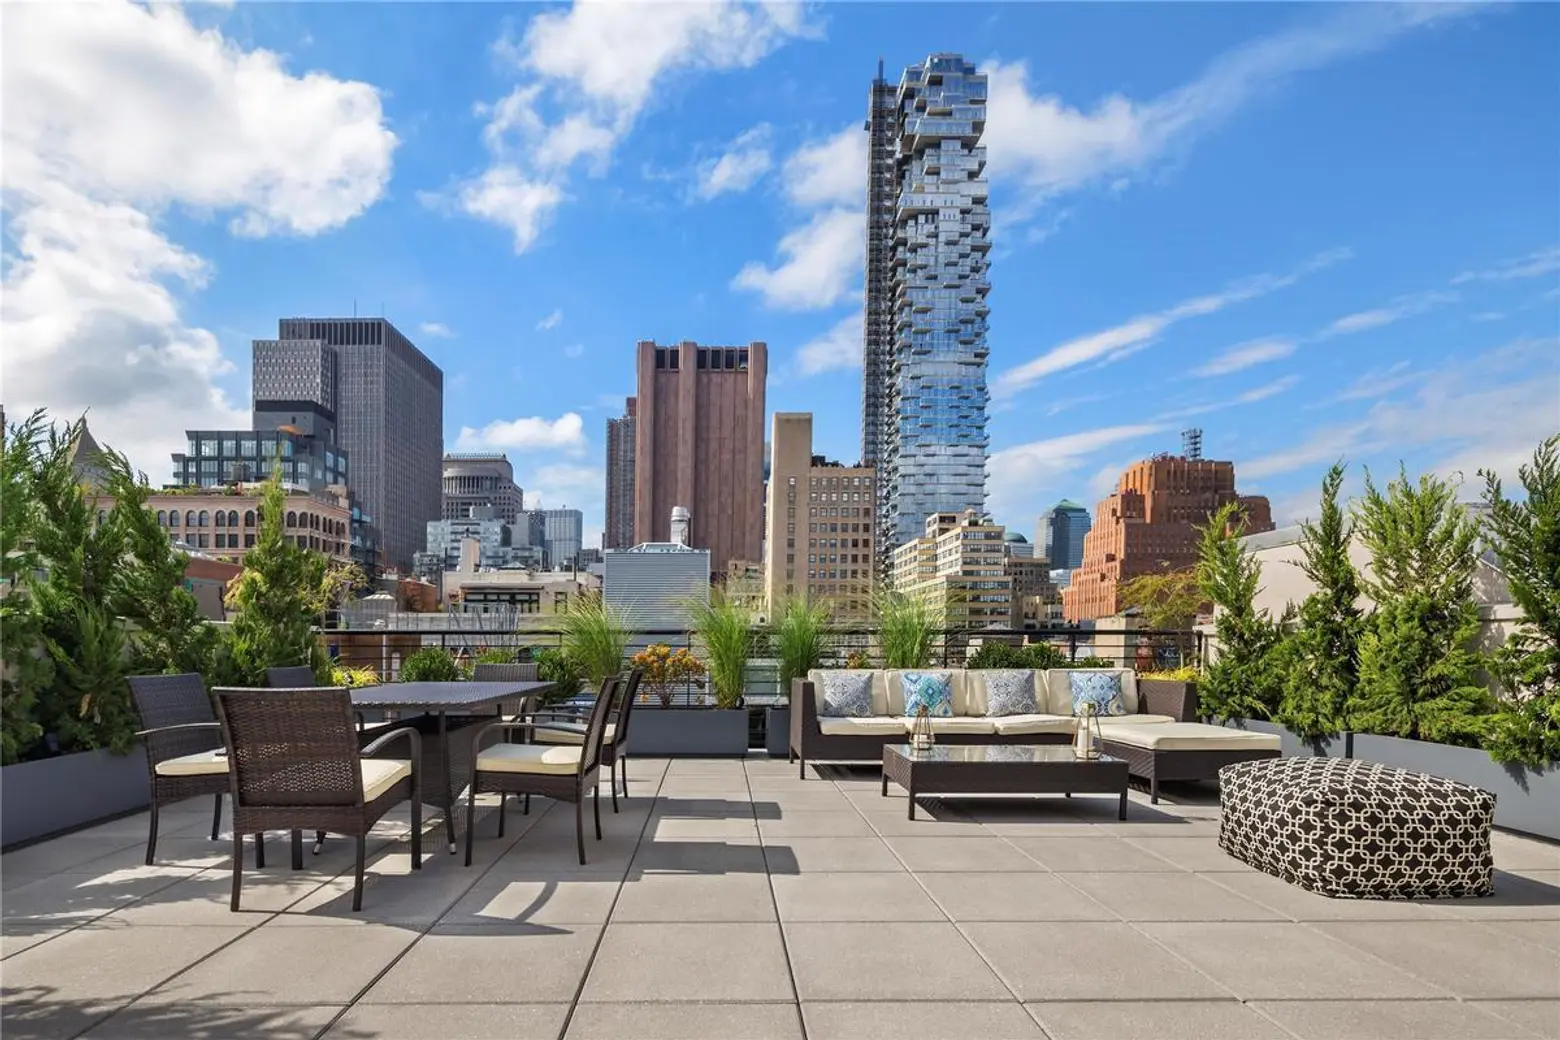 42 Lispenard Street, Pearl Paint, 308 canal Street, Duplexes, Rooftop Spaces, Outdoor Spaces, Penthouse, Loft, Tribeca,